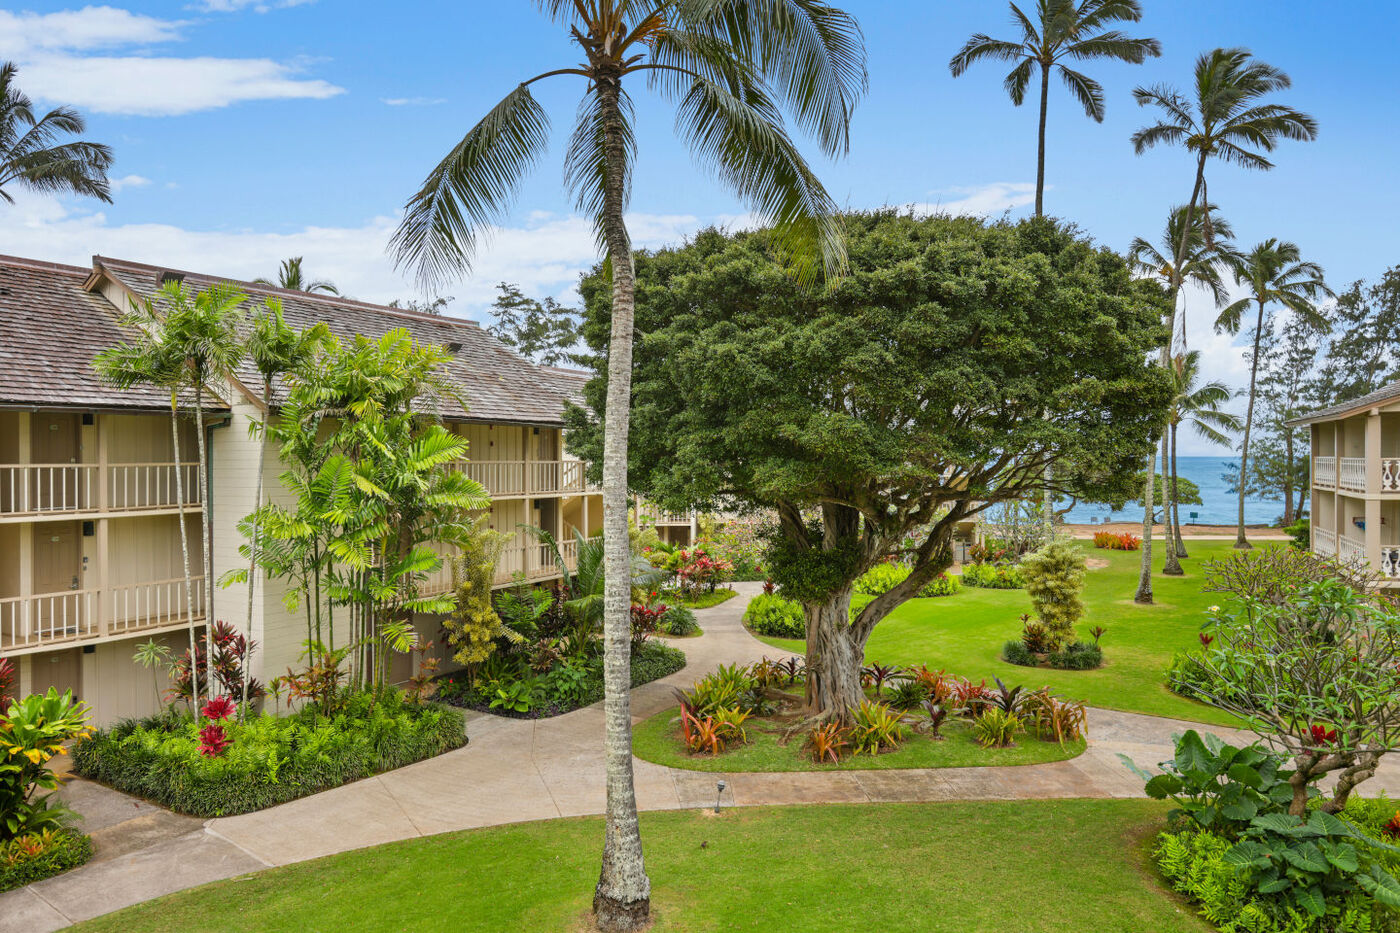 Aston Islander on the Beach lush grounds is landscaped with tropical palm trees, plants and the beach with is just a few steps away